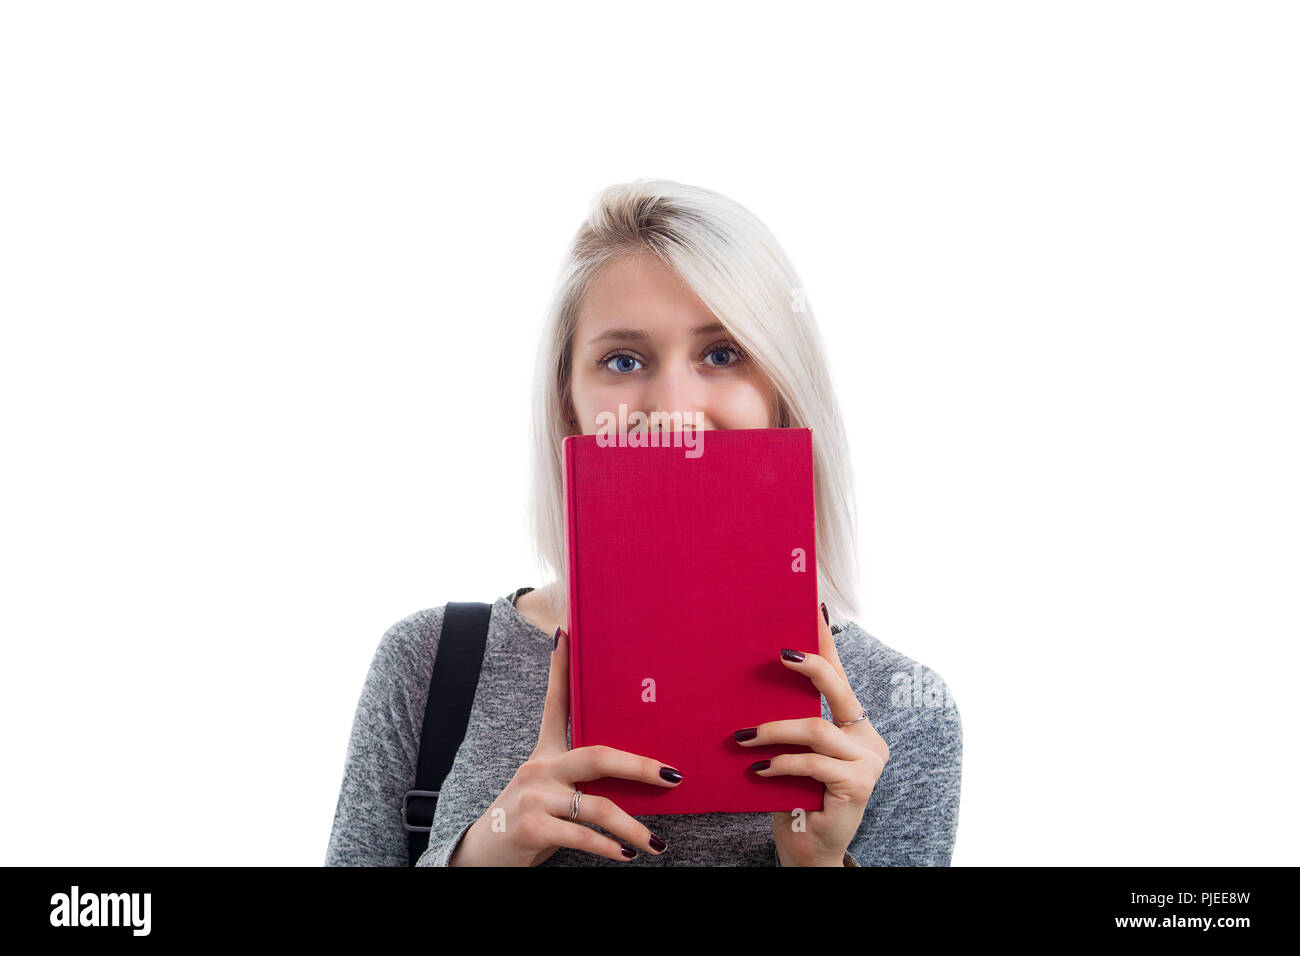 Shy woman student cover her mouth using a closed red book. Hide face expression, change identity isolated over white background. Stock Photo